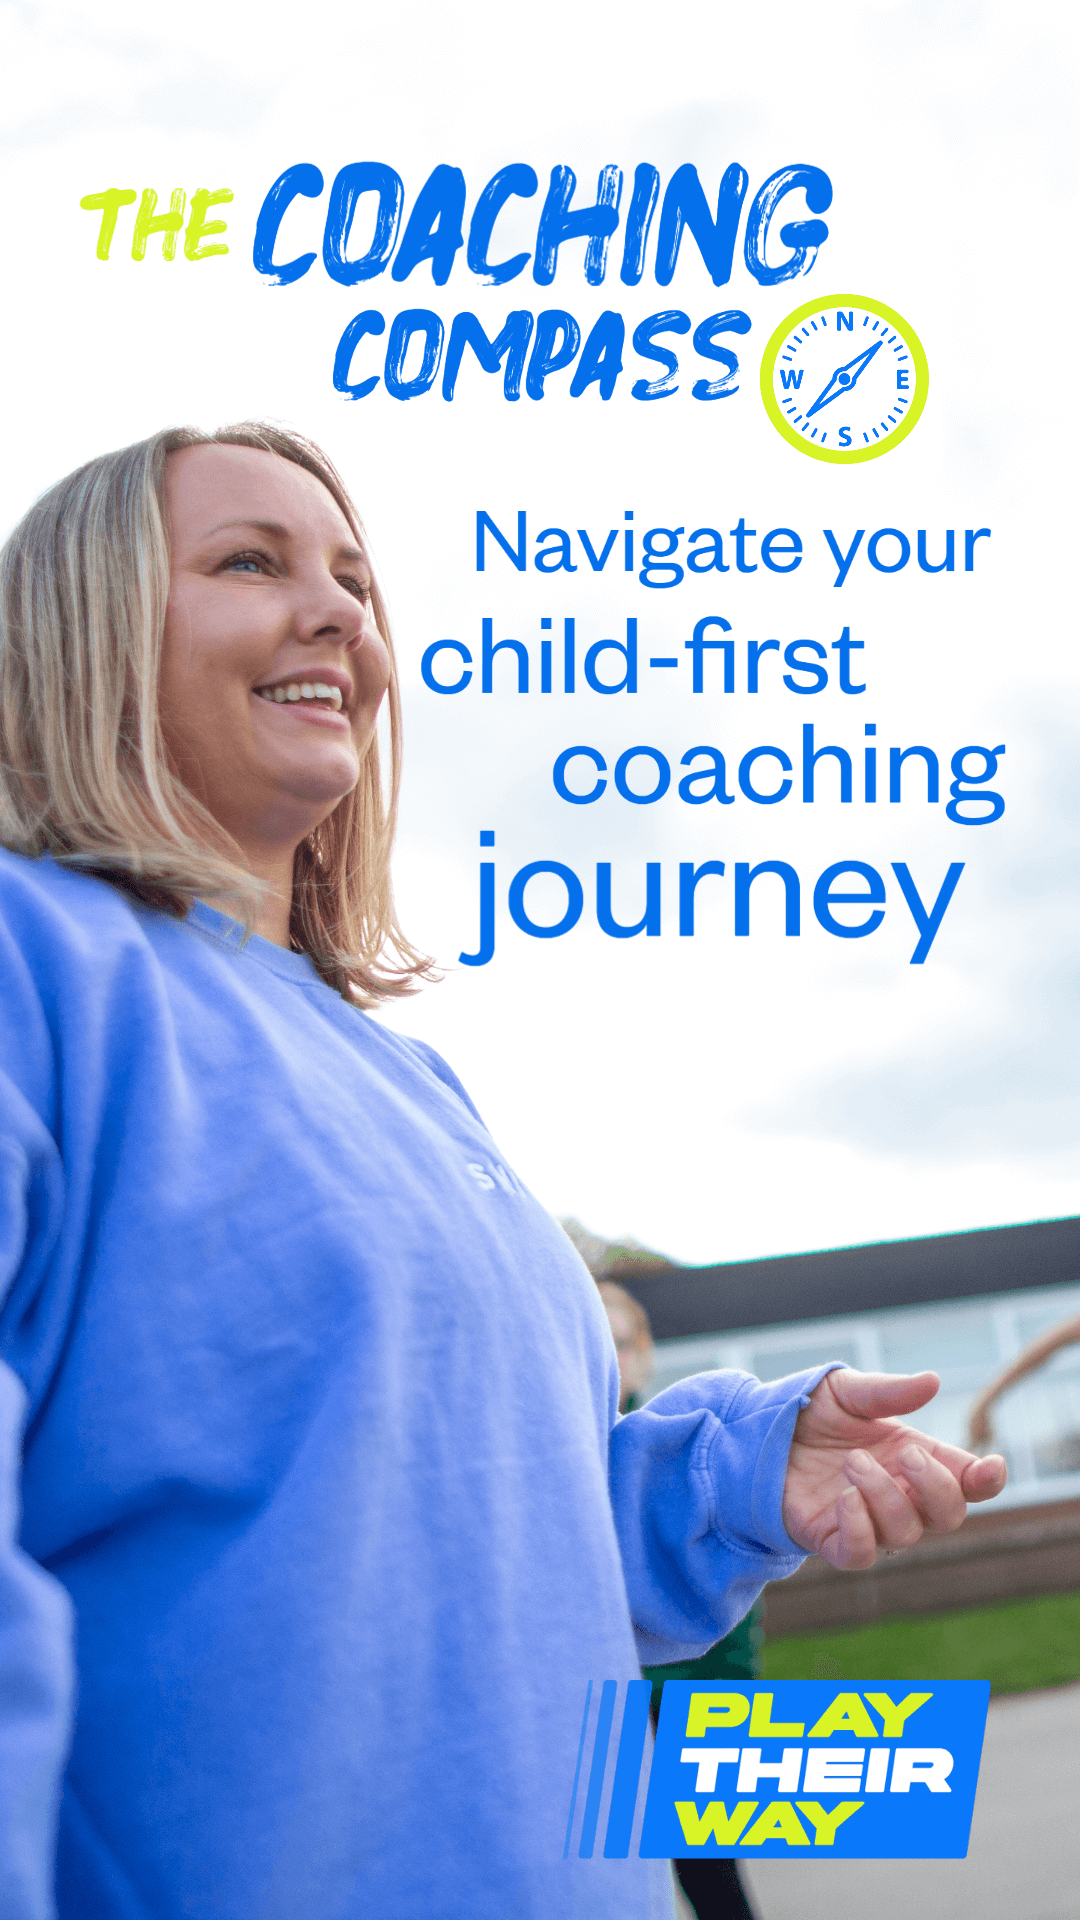 Coaching Compass - navigate your child first journey